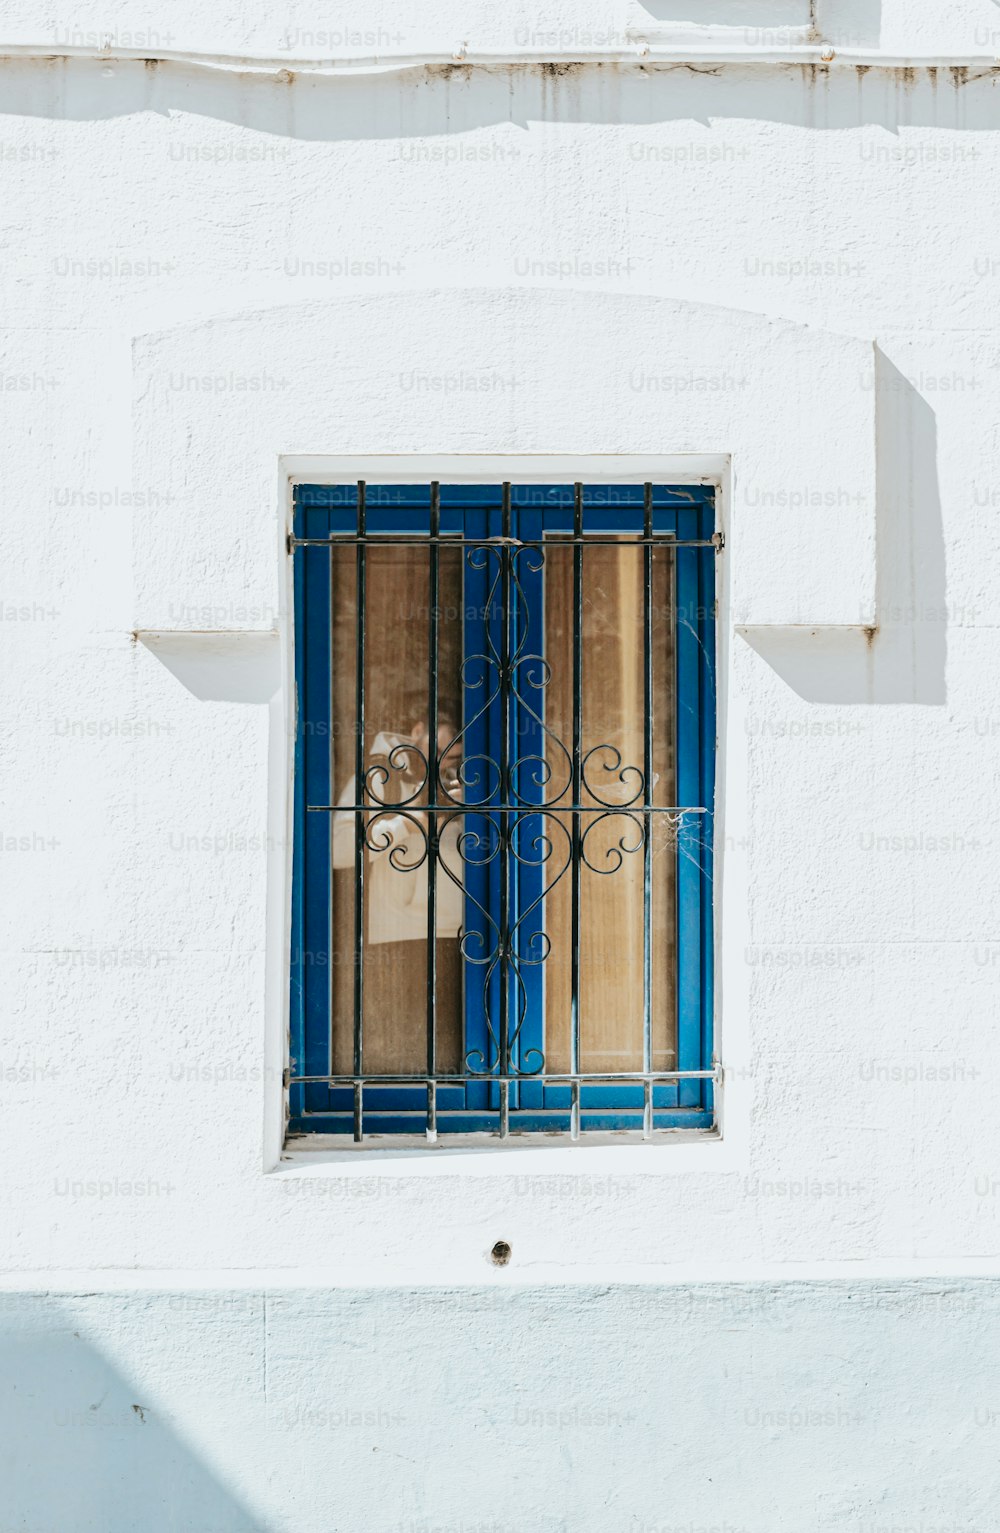 a white building with a blue window and bars